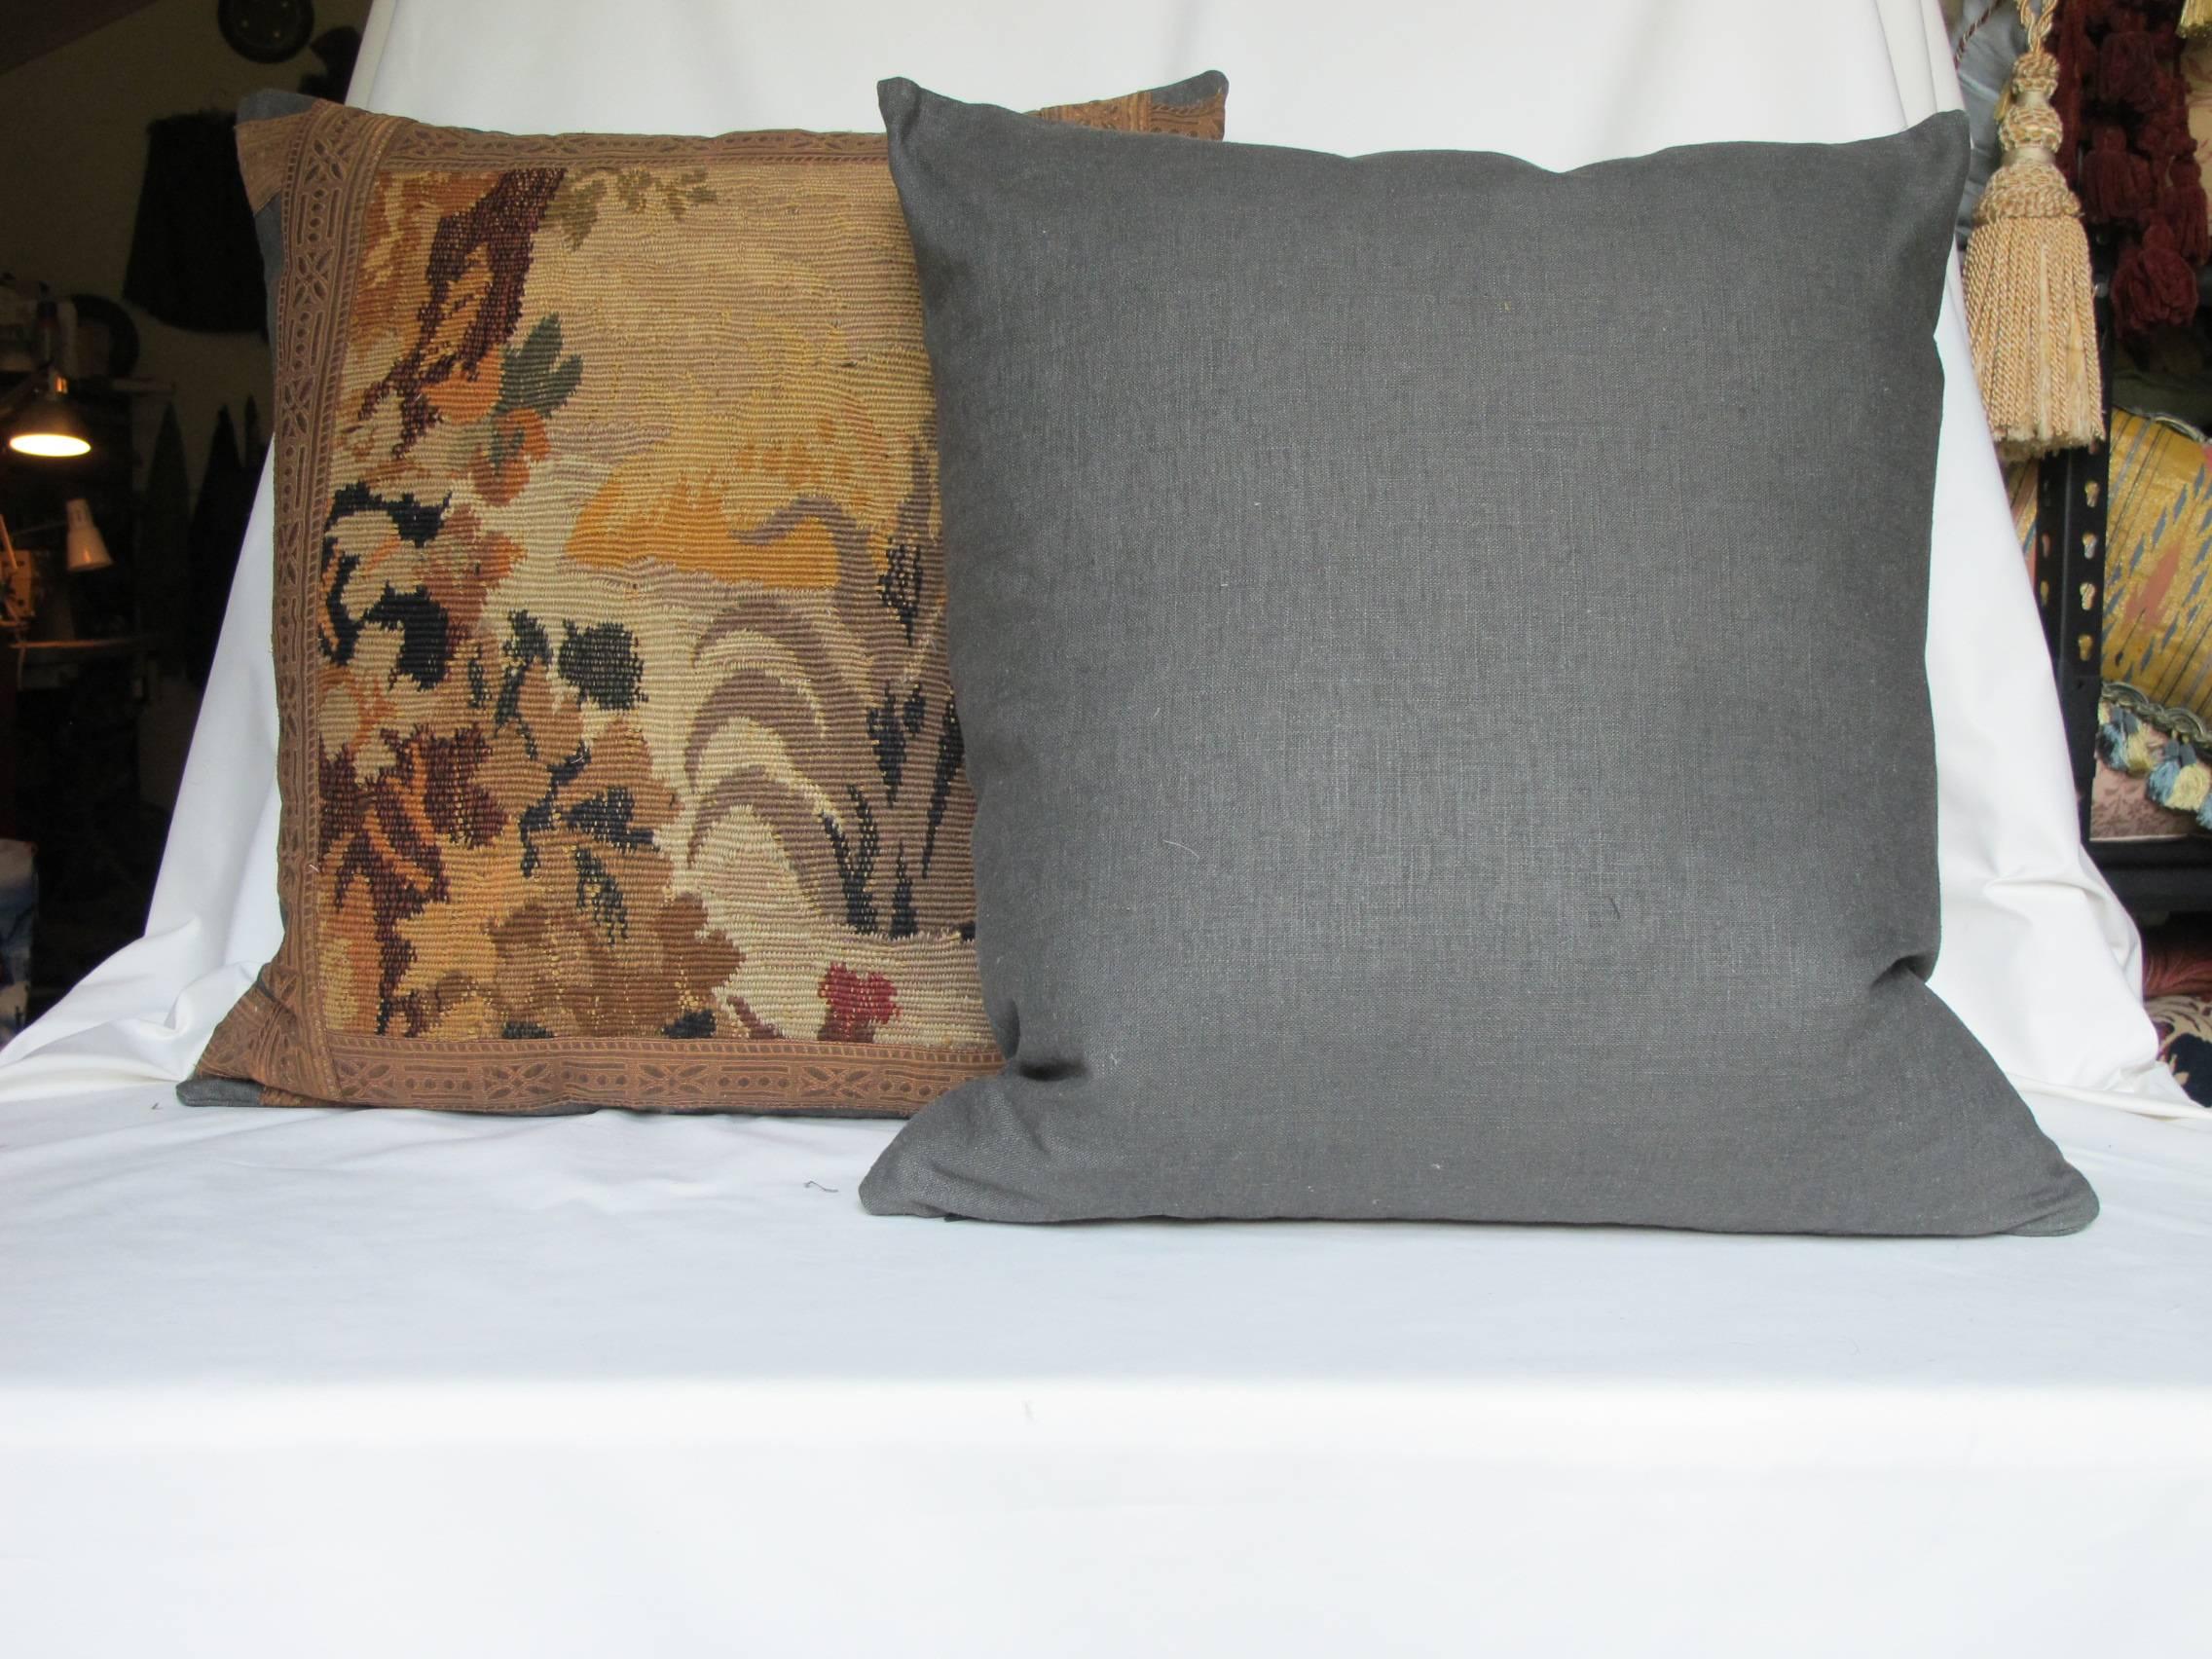 Pillows made from a circa 1860s French Aubusson weave tapestry fragment, depicting foliage and a bird.
Edged and backed with coordinating Belgian linen and embellished with antique metallic trim, with a hidden zipper closure, down inserts